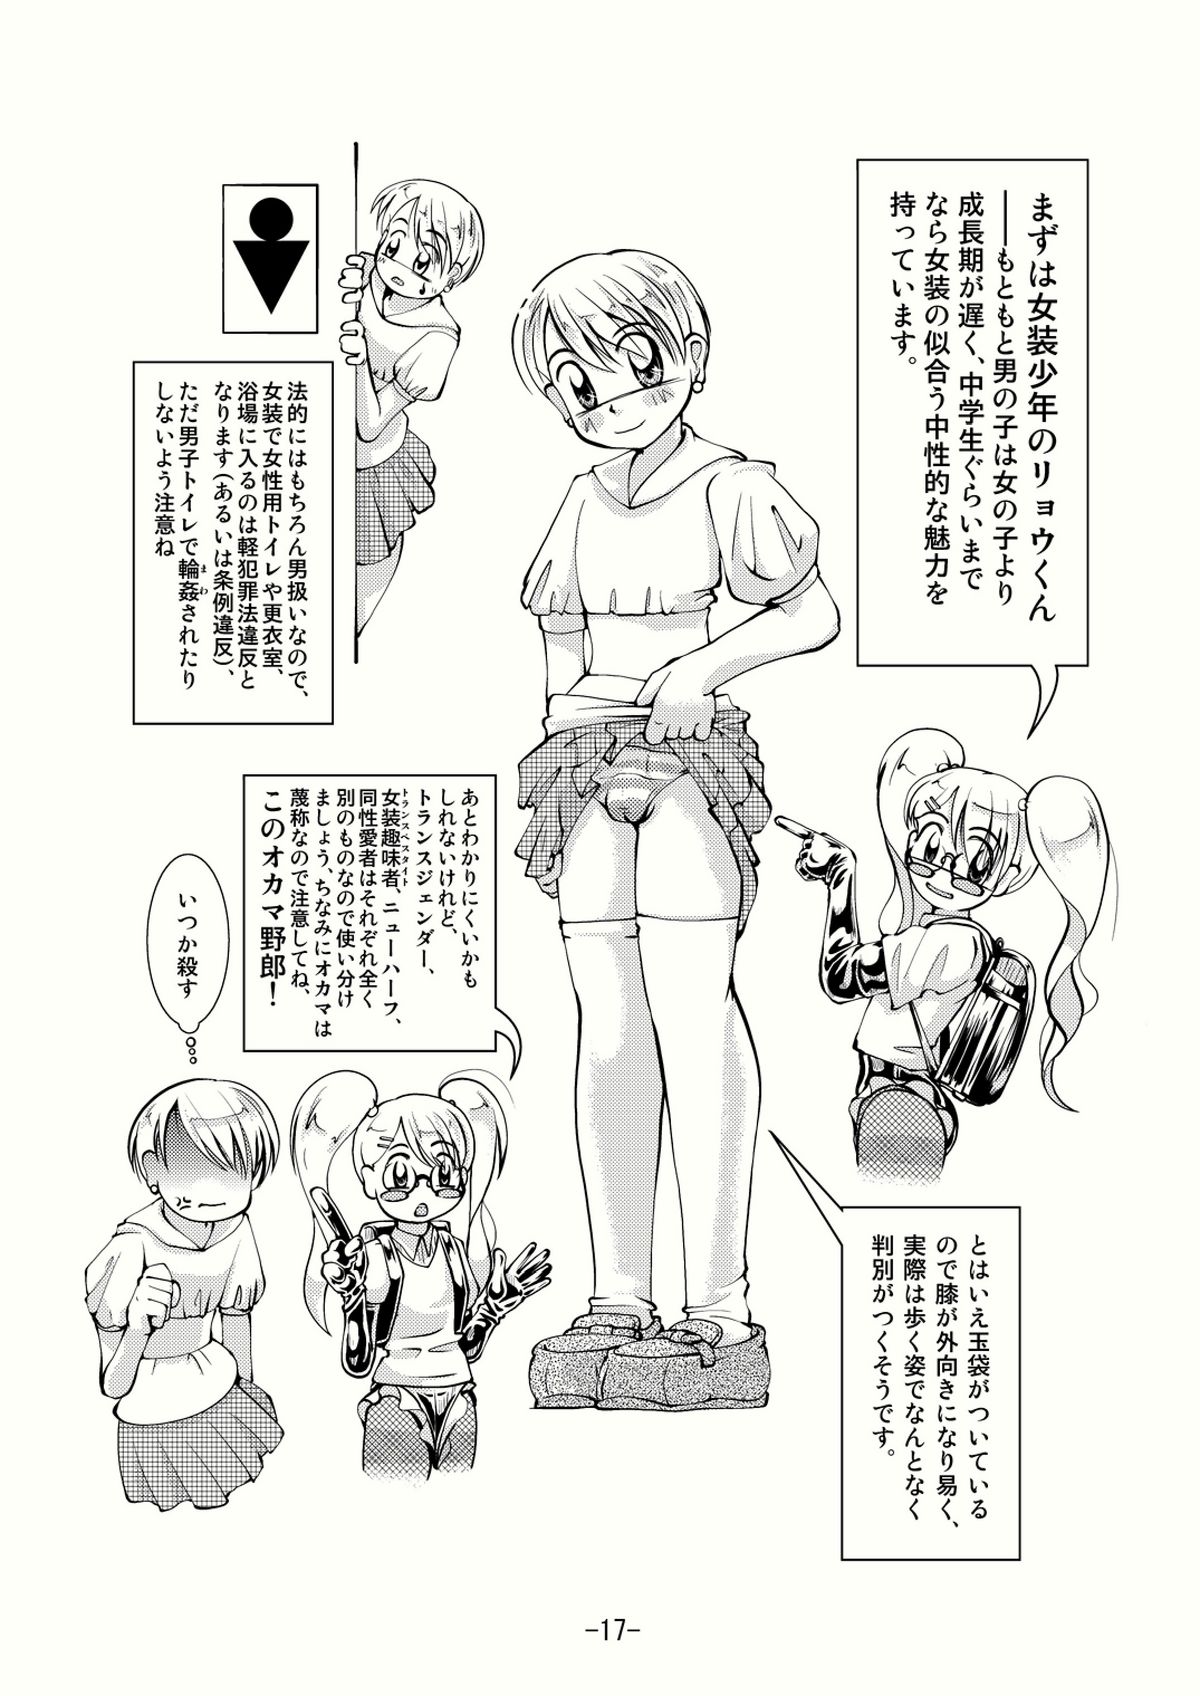 AndrogynousをBoyに接続する